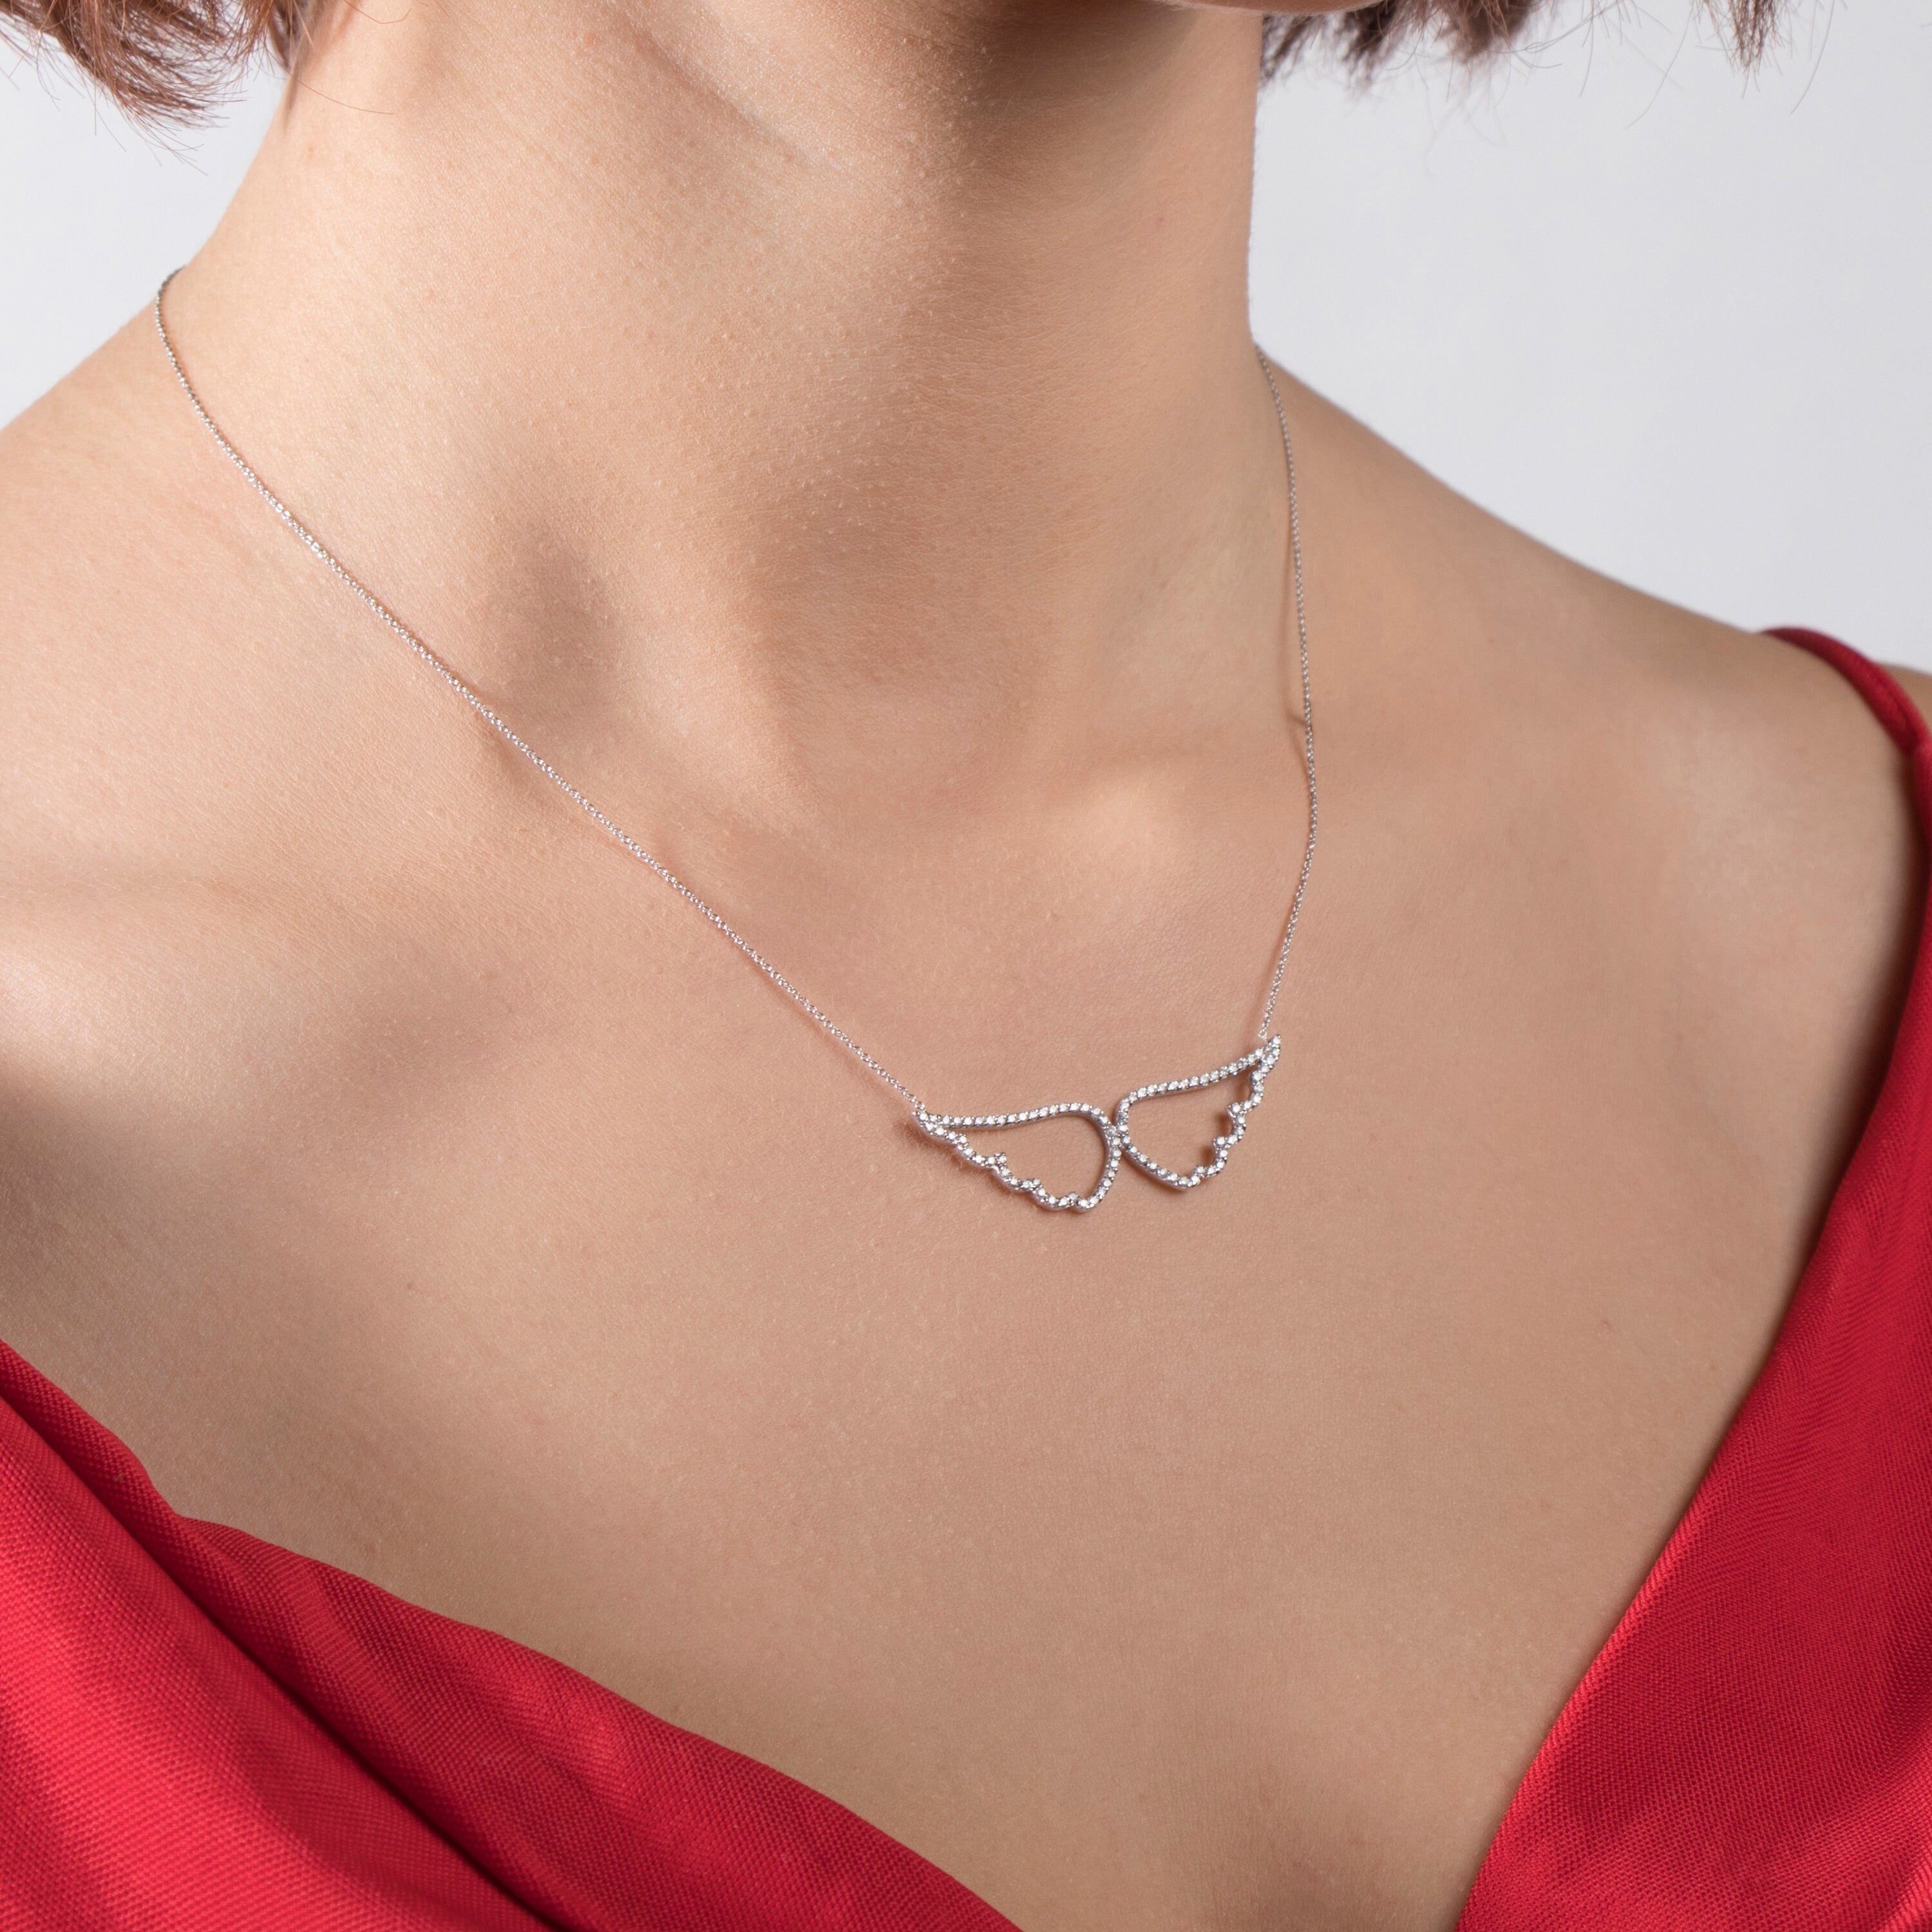 Diamond Angel Wing Necklace in 18K Gold